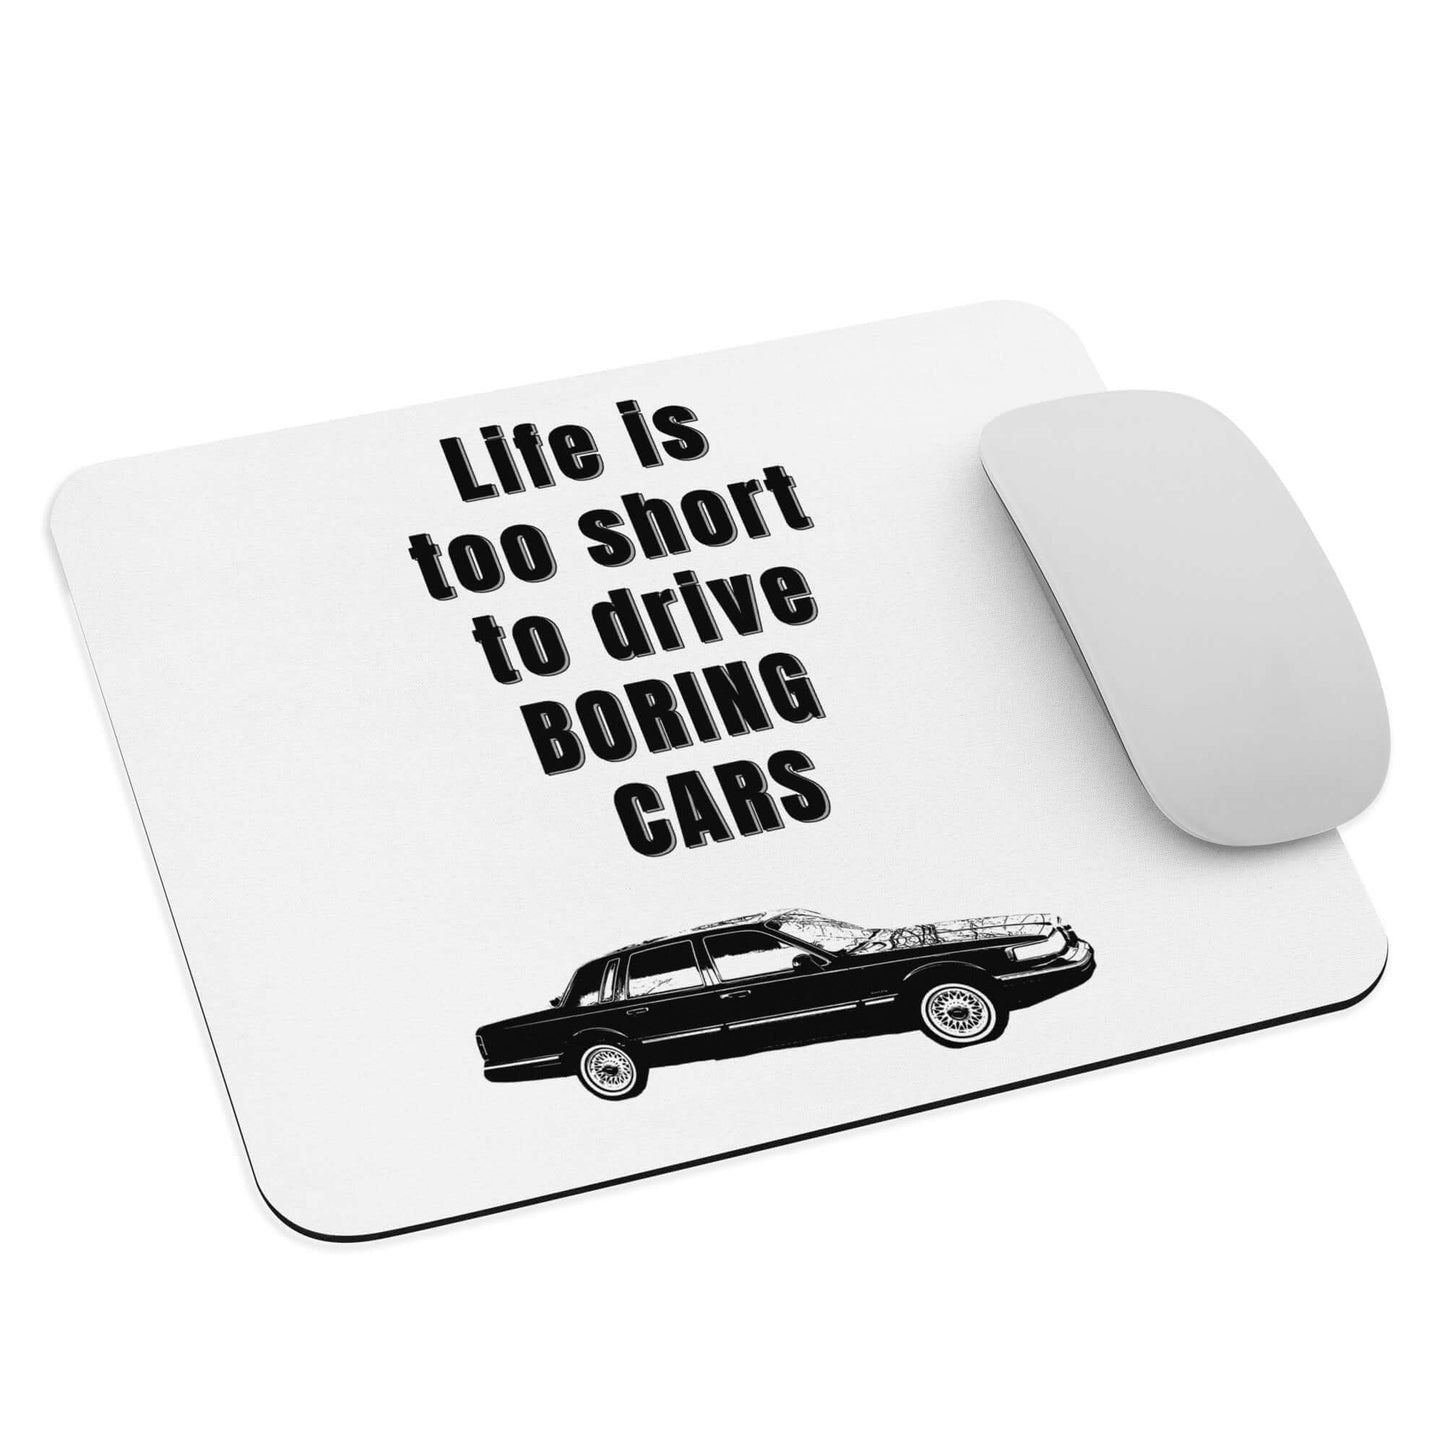 Life is too short to drive boring cars - 1997 Lincoln Town Car - Mouse pad - Horrible Designs